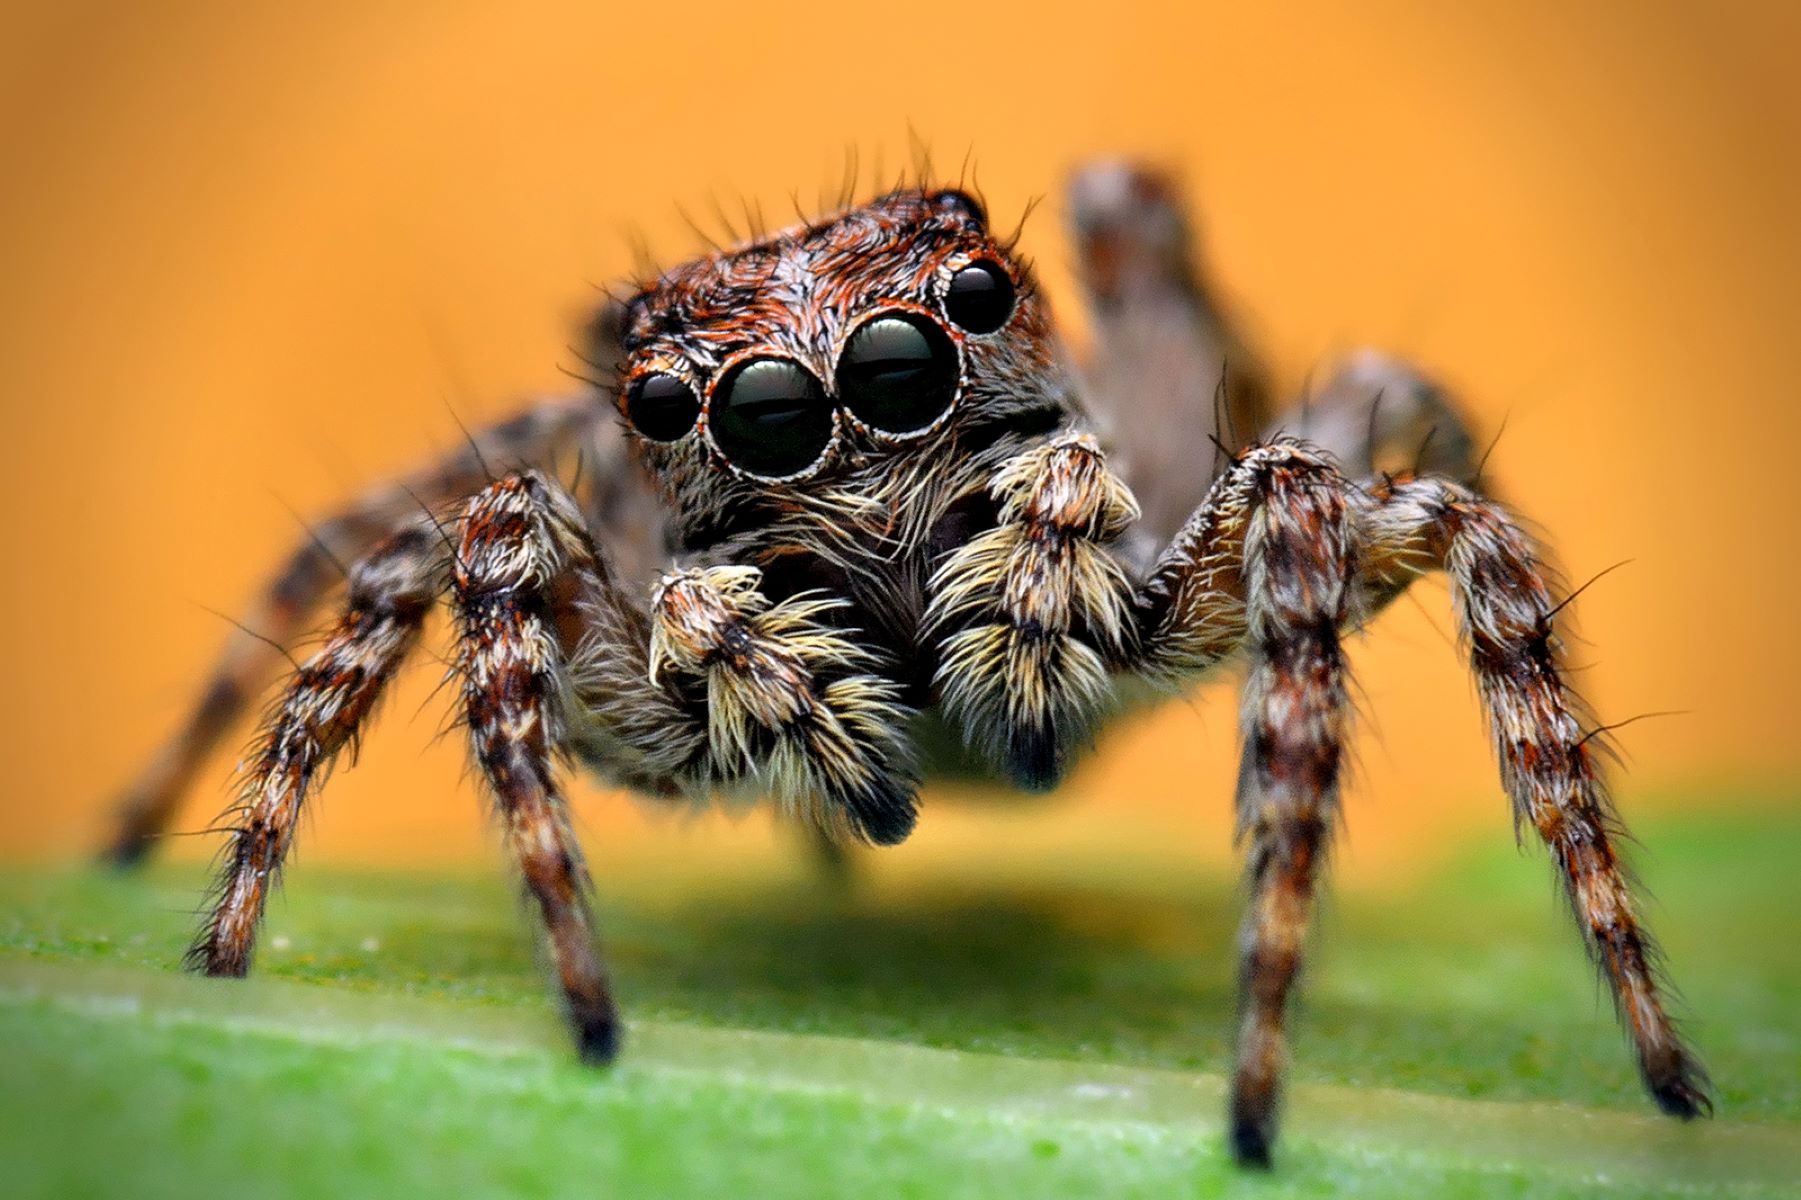 Nature curiosity: Why do spiders have so many eyes?